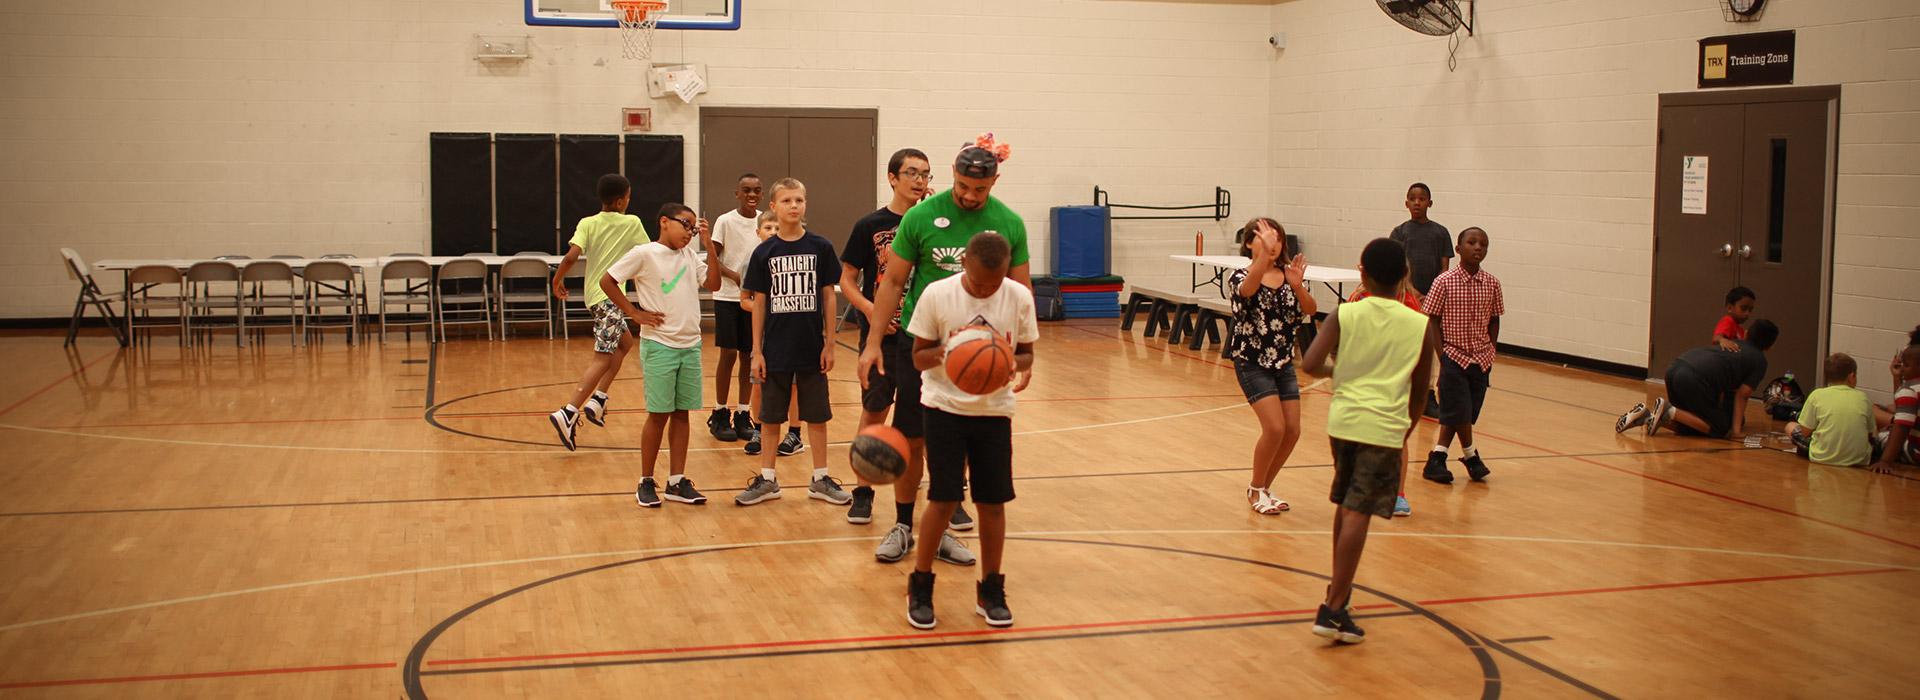 Greenbrier Family YMCA kids playing basketball